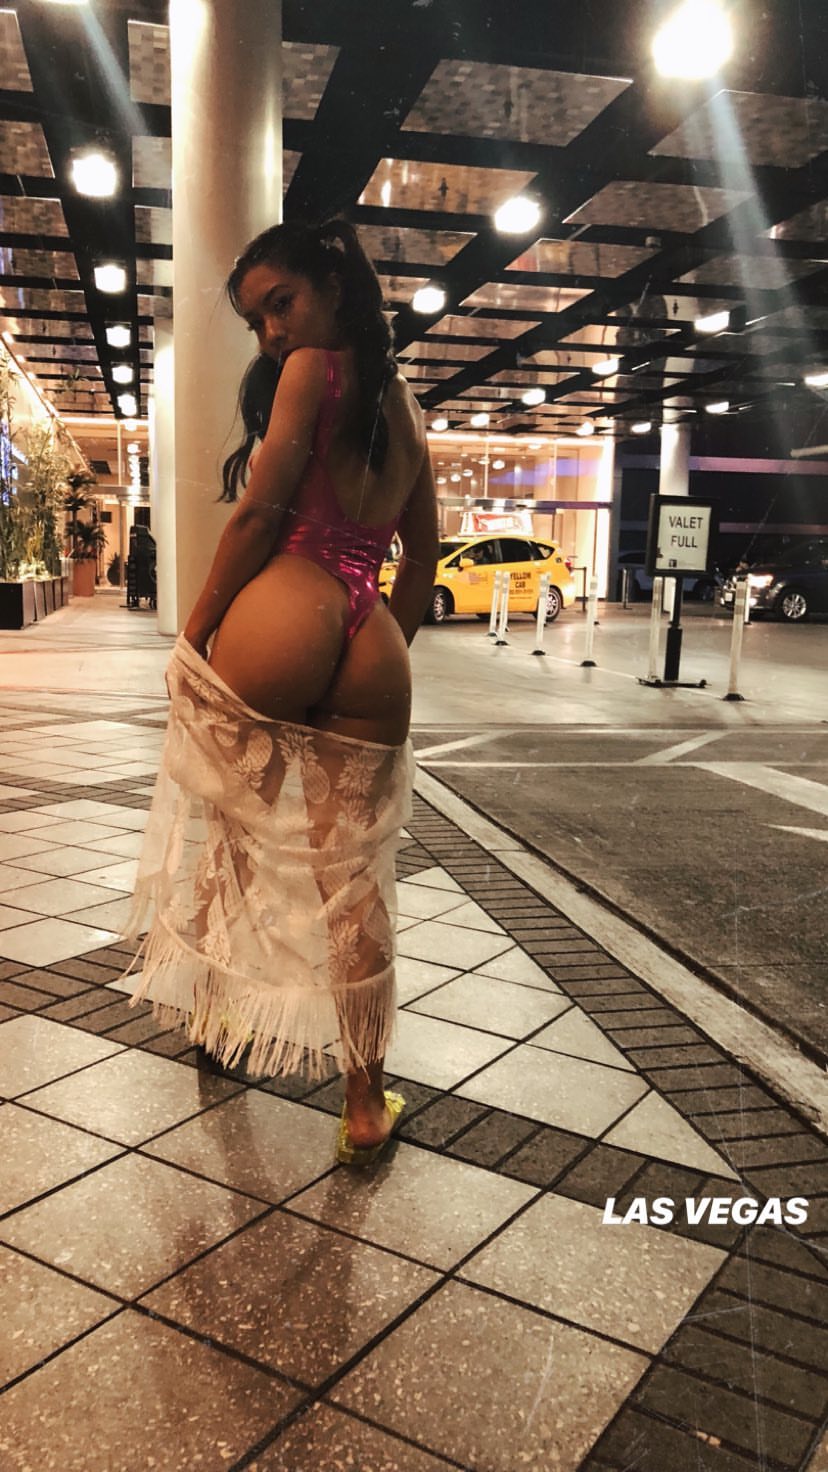 Maleah Quan, in a thong, on a Vegas street. You're welcome.